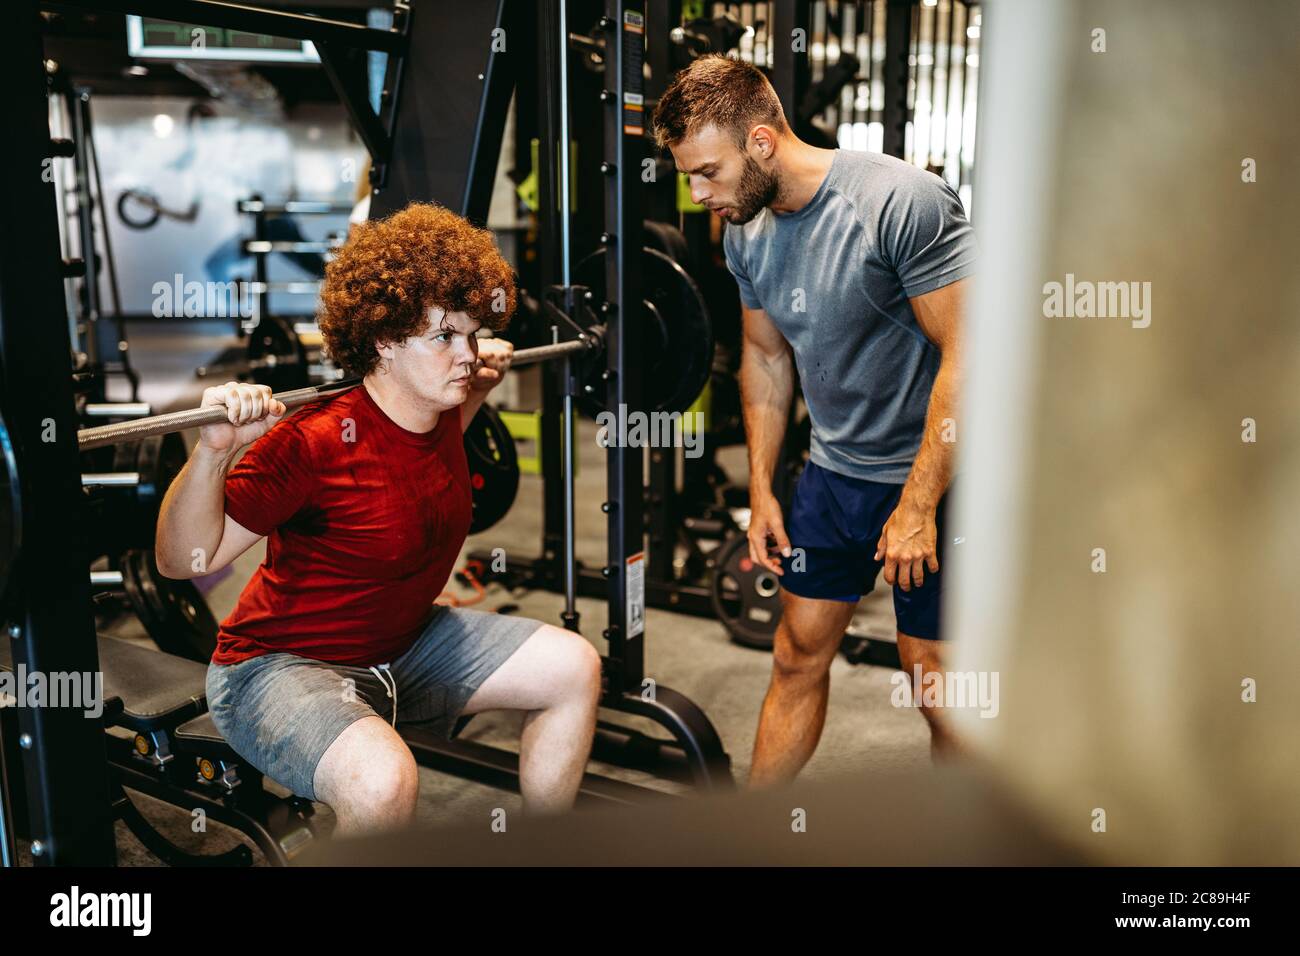 Overweight young man with trainer exercising in gym Stock Photo